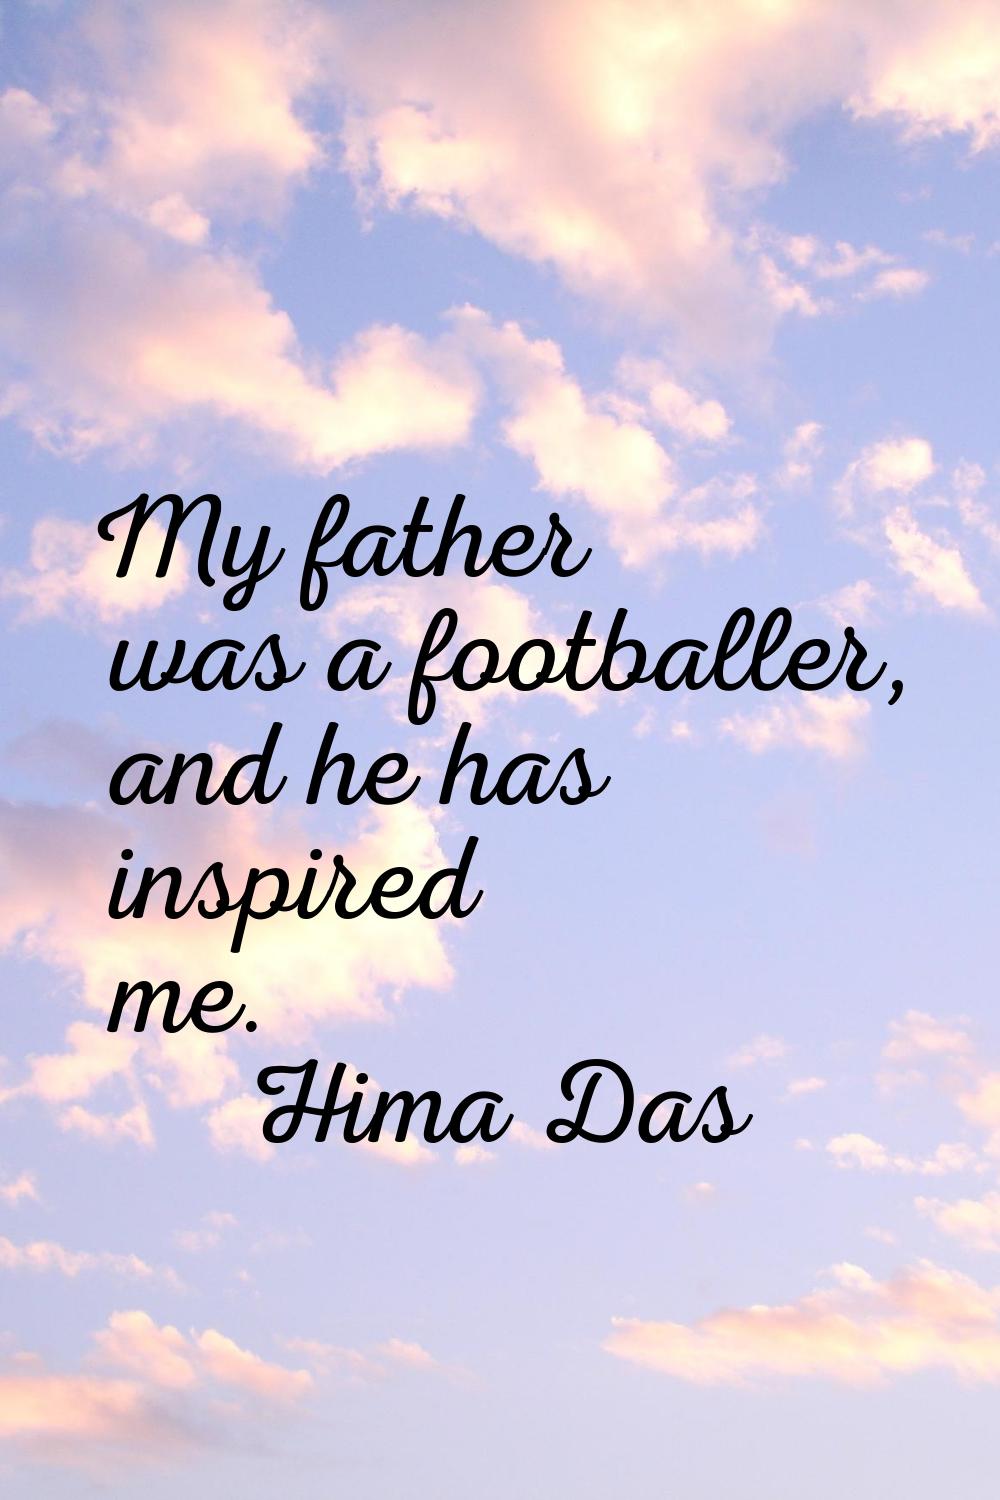 My father was a footballer, and he has inspired me.